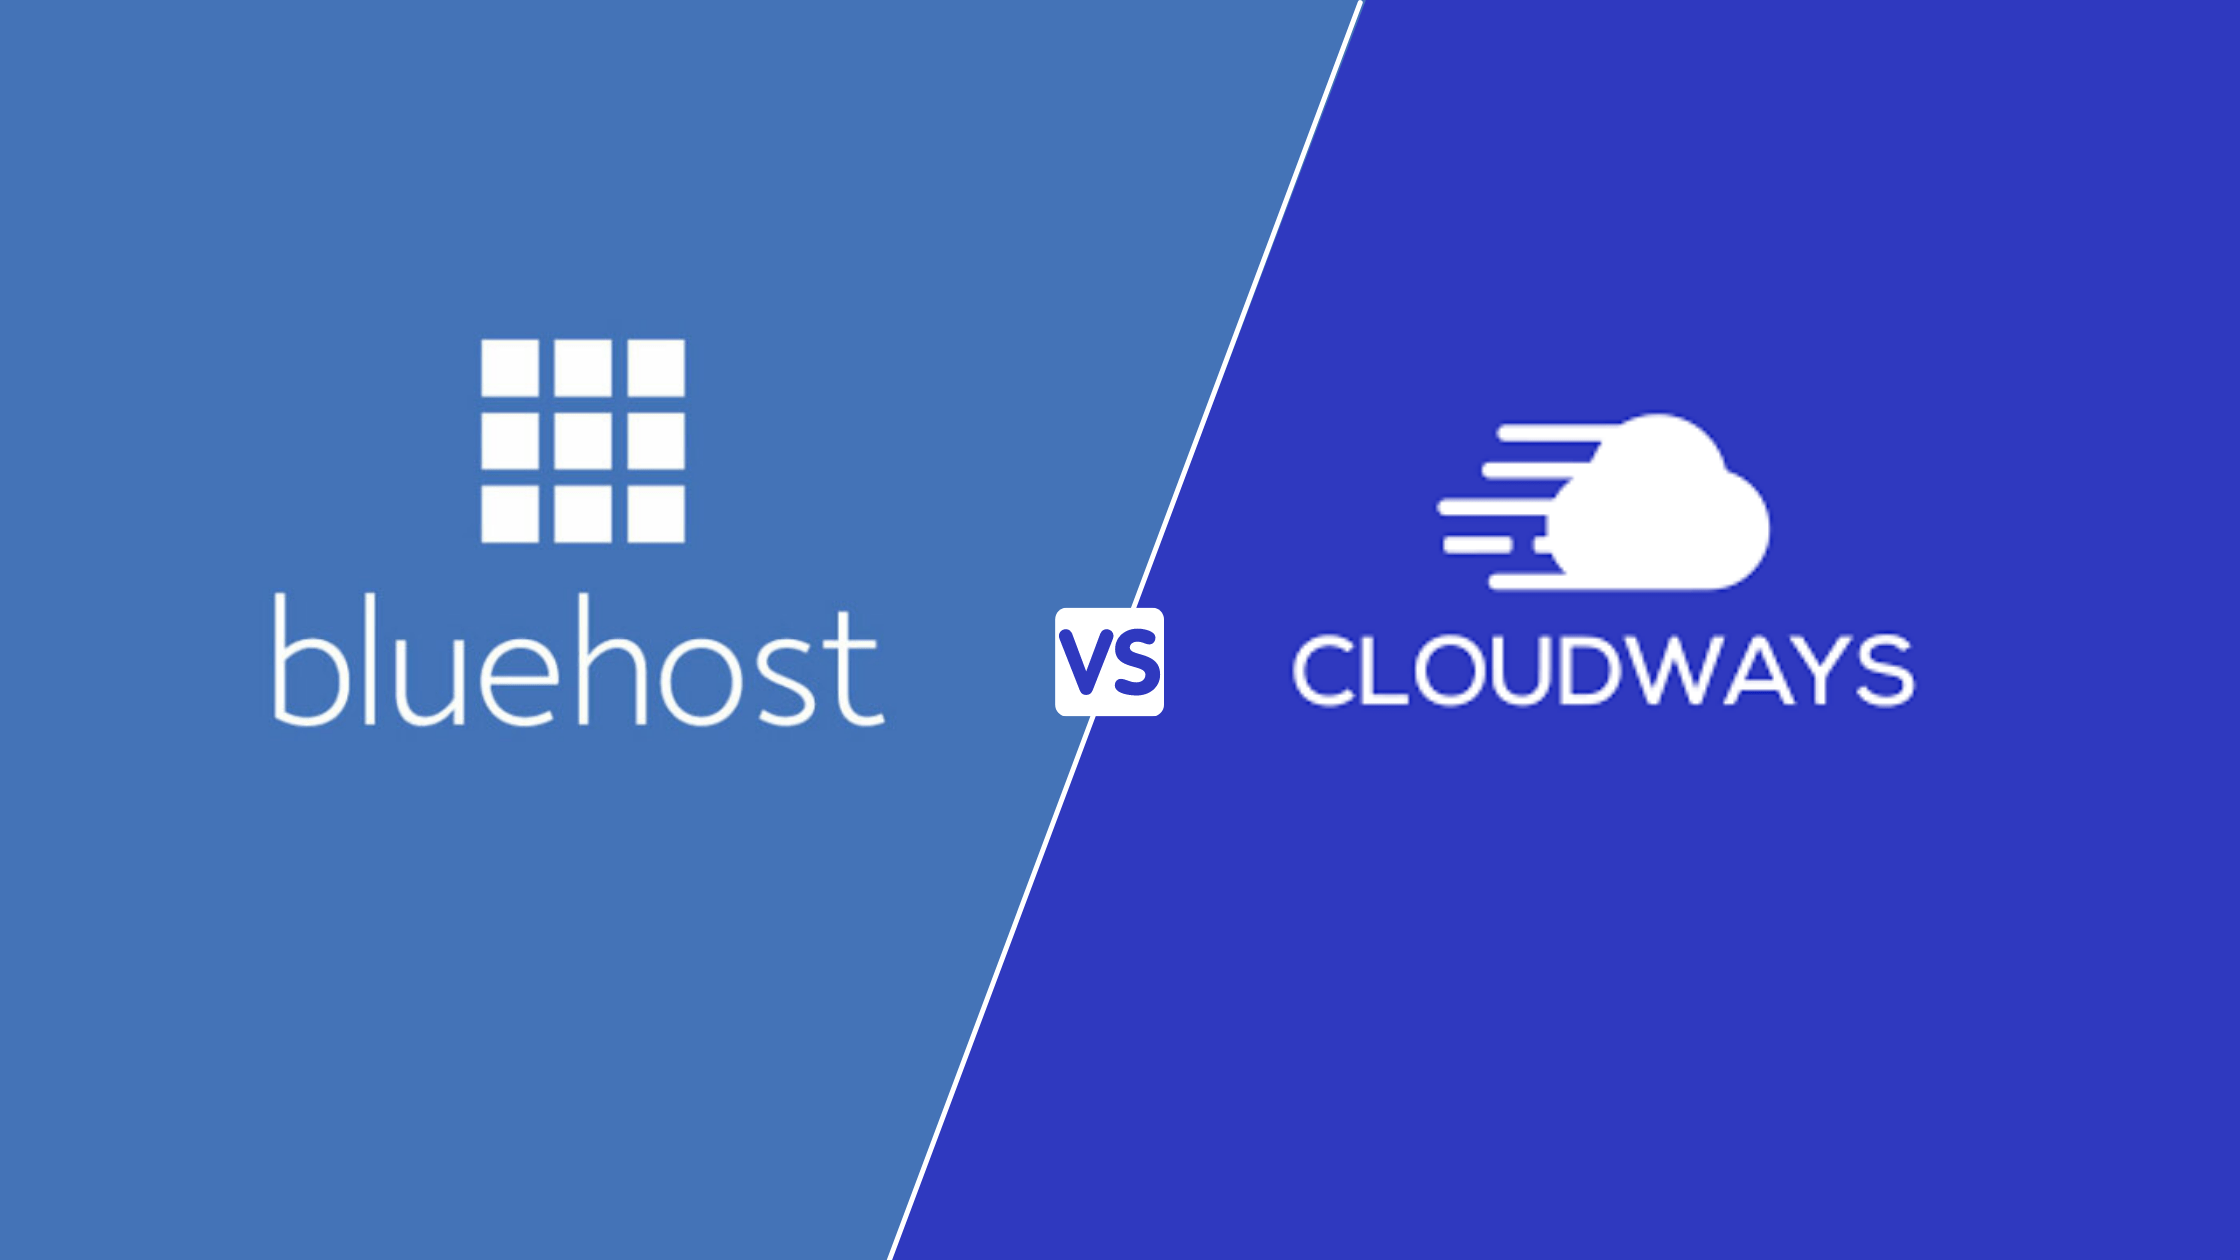 Cloudways Vs Bluehost Hosting Comparison: Which one is Best